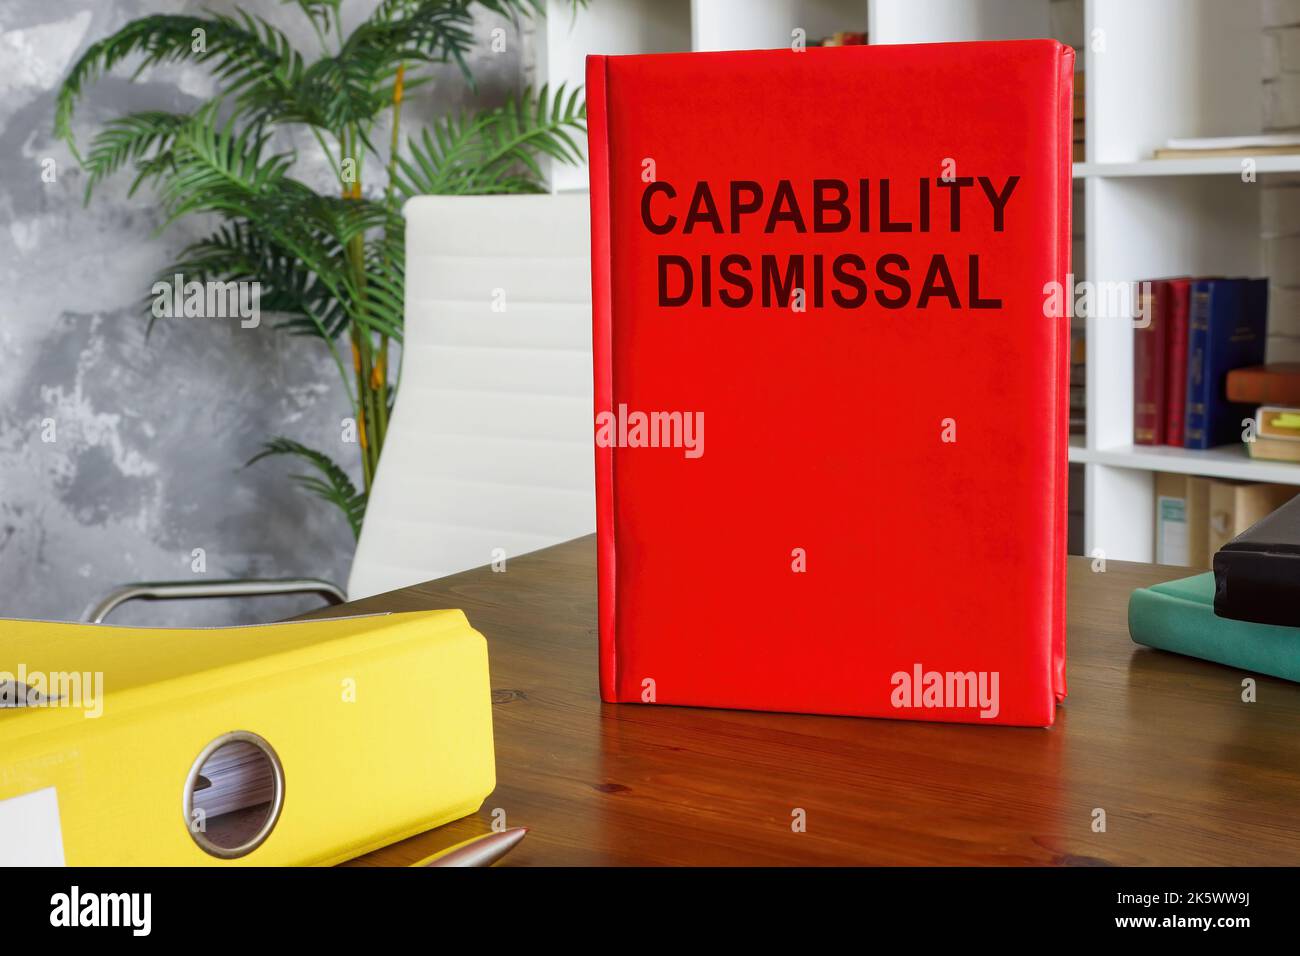 Book about Capability dismissal in the office. Stock Photo